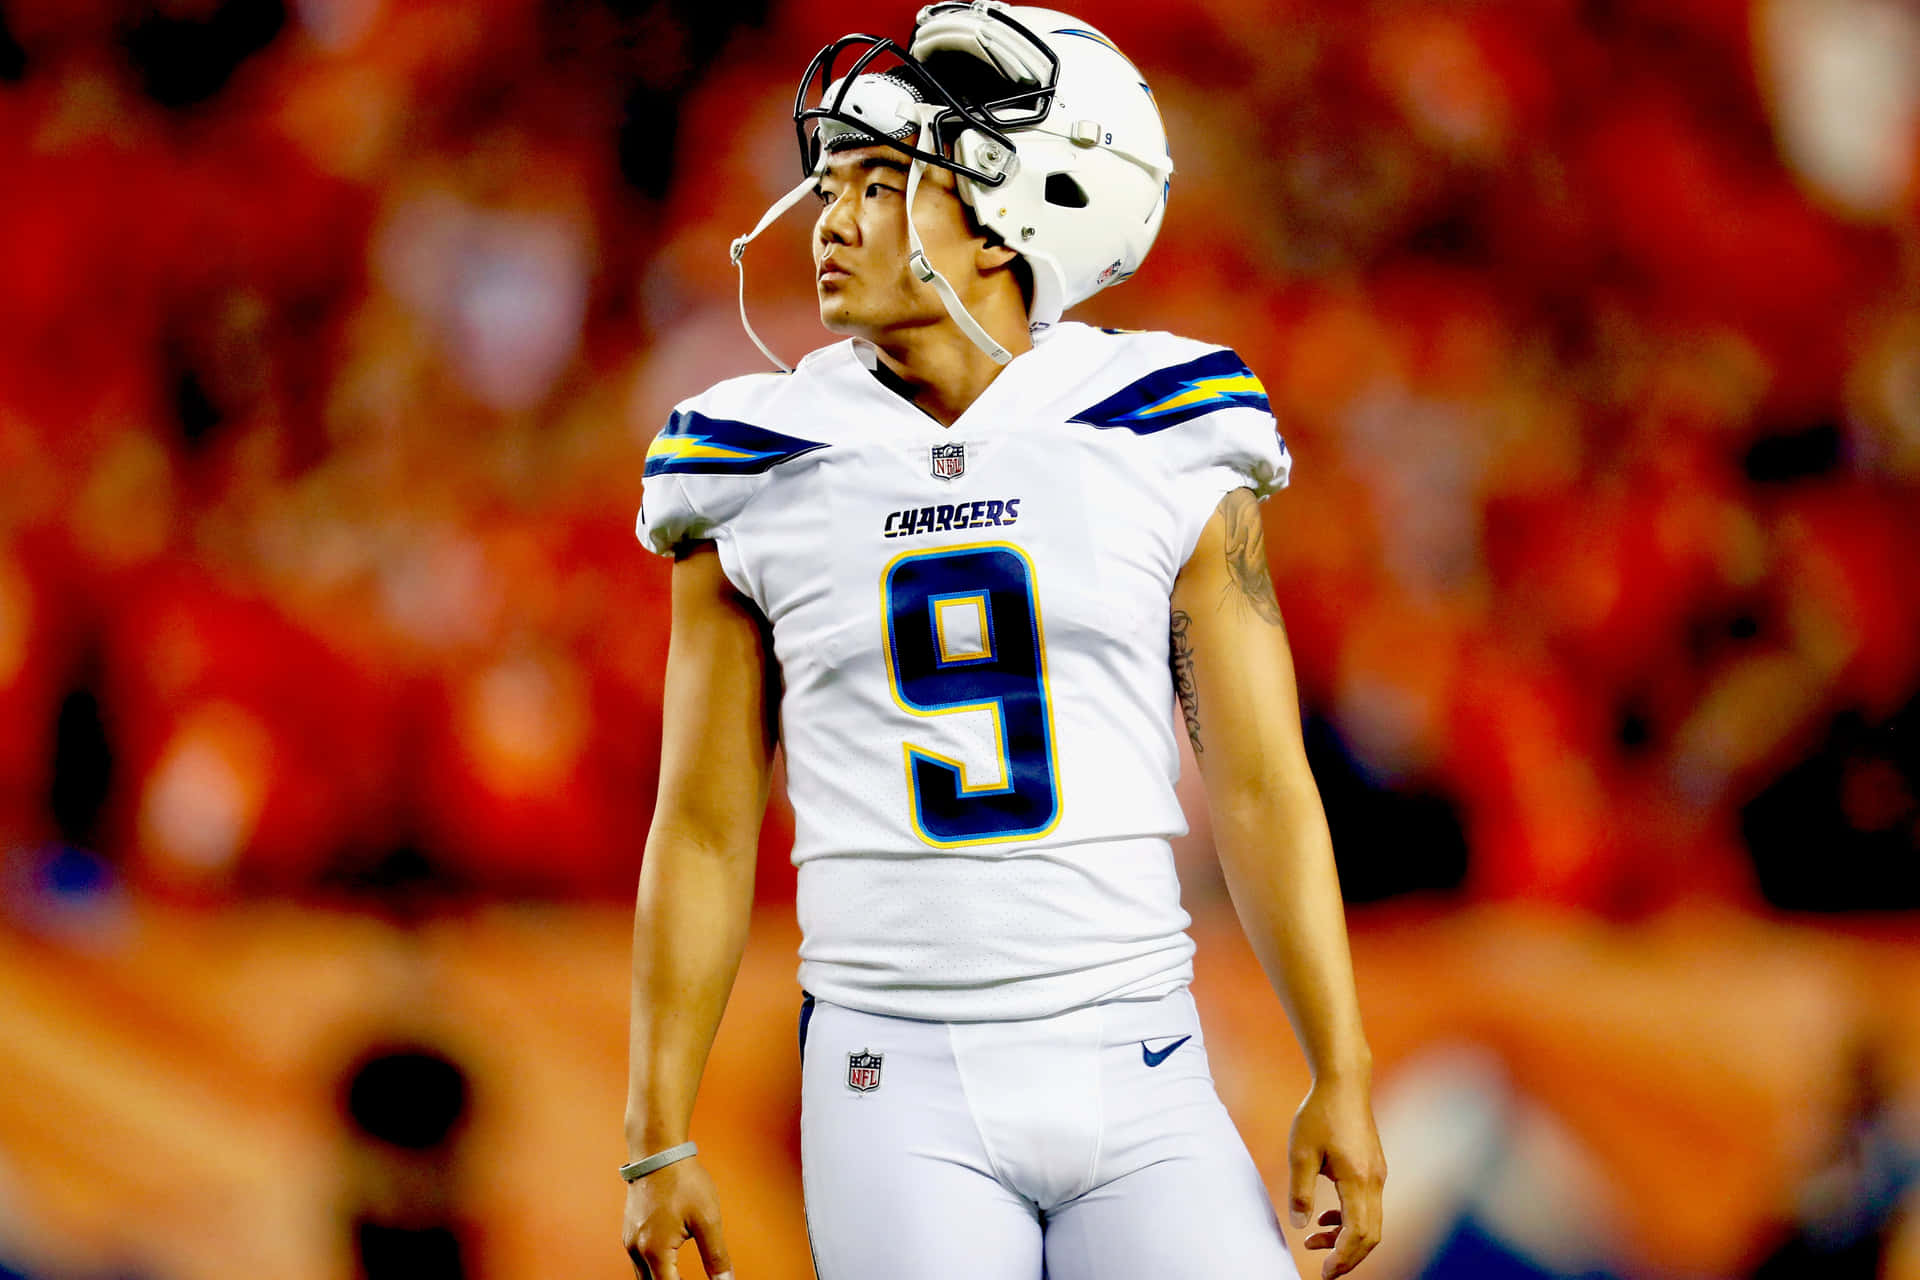 Football Player Number9 Chargers Wallpaper